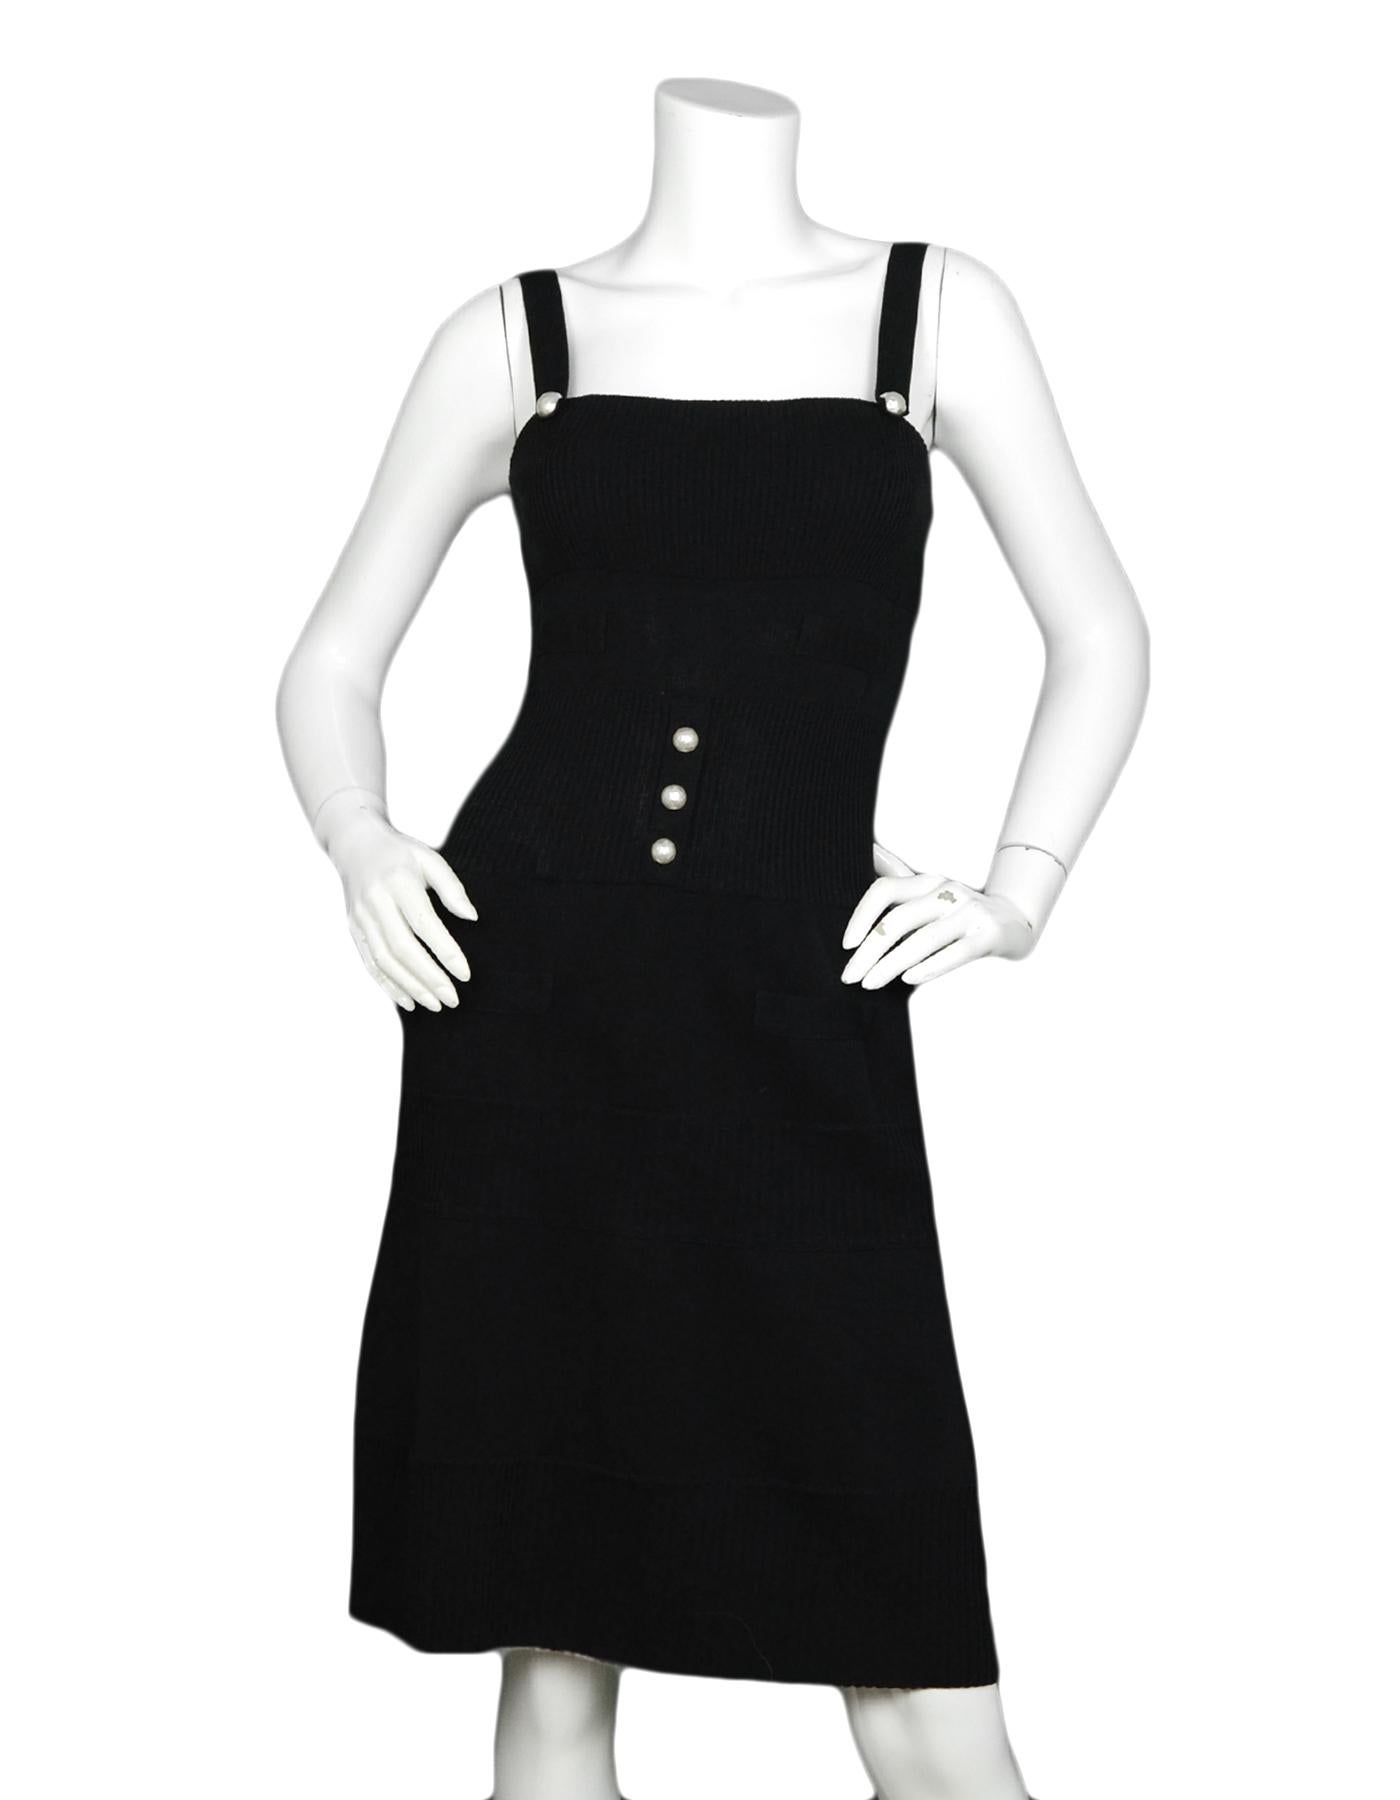 Chanel Black Stretch Sleeveless Dress w/ Pearl Buttons sz 38

Made In: Italy
Color: Black
Materials: 68% Cotton, 32% Nylon
Lining: 68% Cotton, 32% Nylon
Opening/Closure: Back zipper
Overall Condition: Excellent pre-owned condition

Tag Size: FR 38